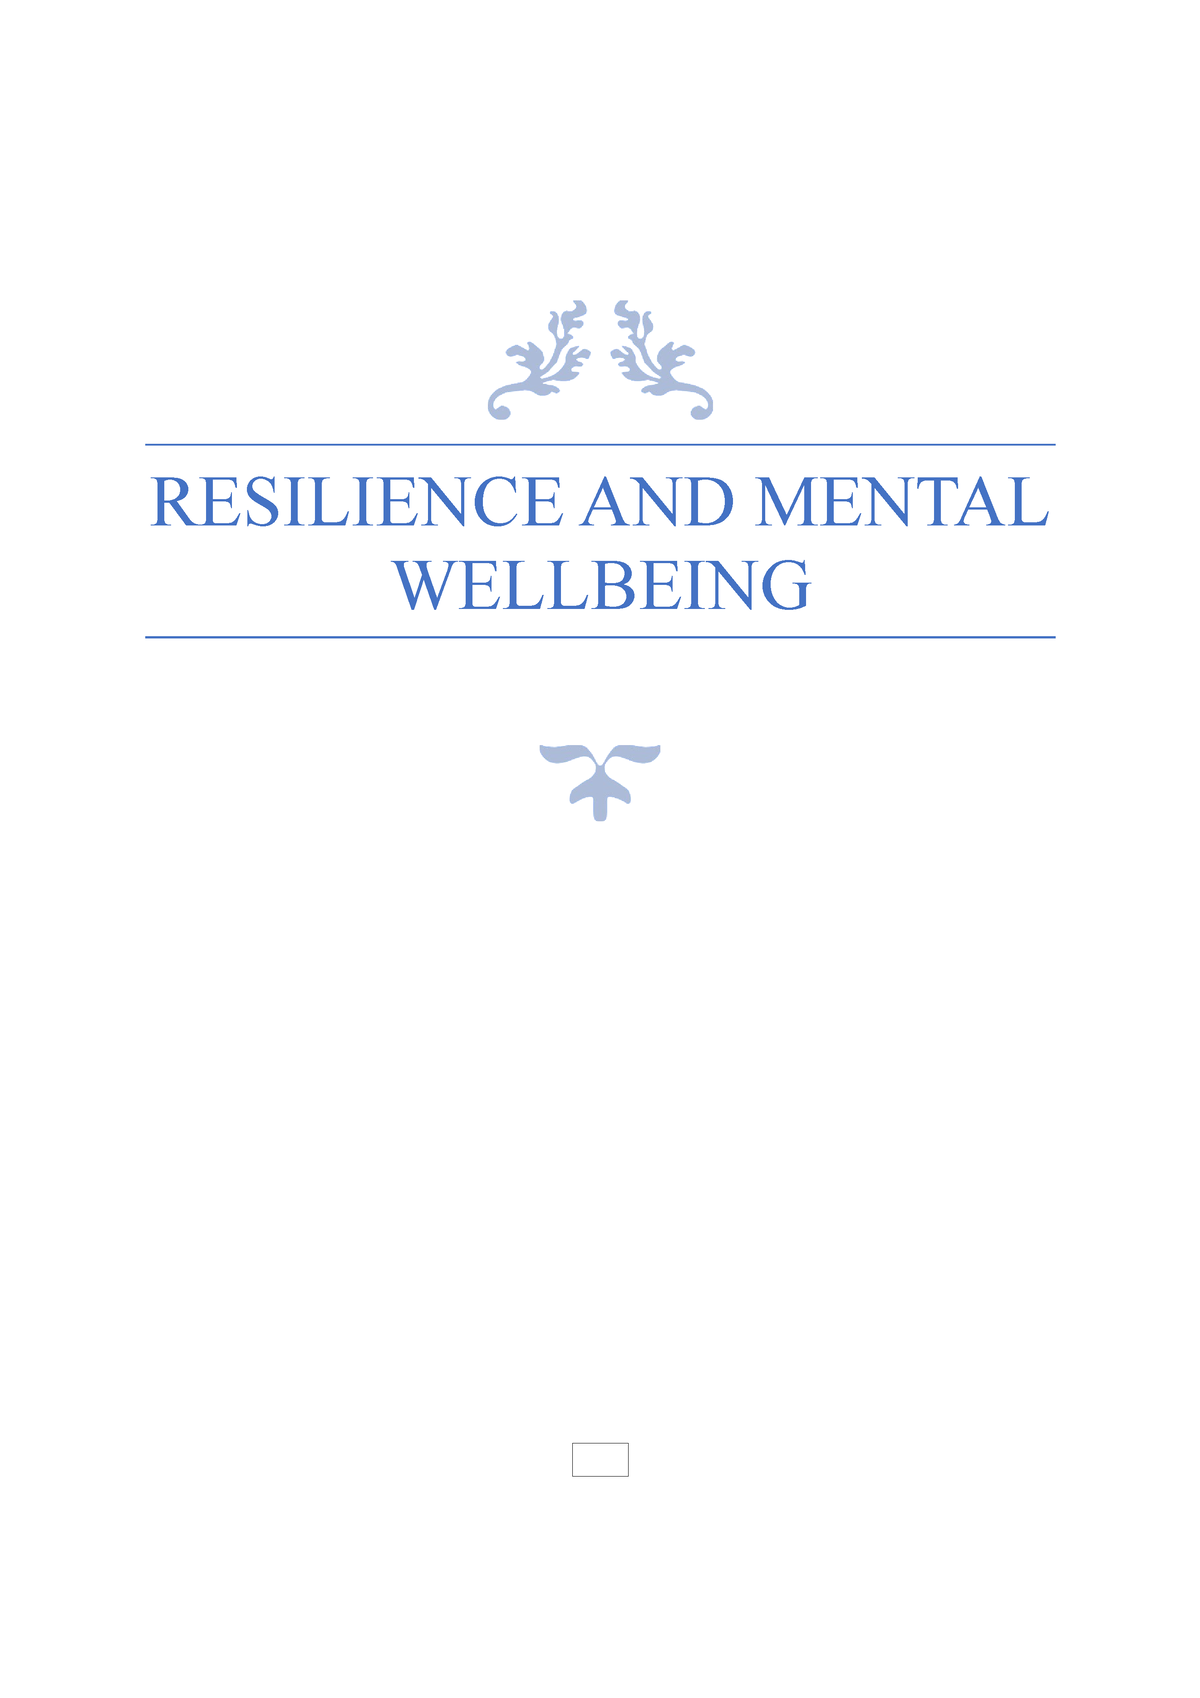 Resilience AND Mental Wellbeing unit 4 - RESILIENCE AND MENTAL ...